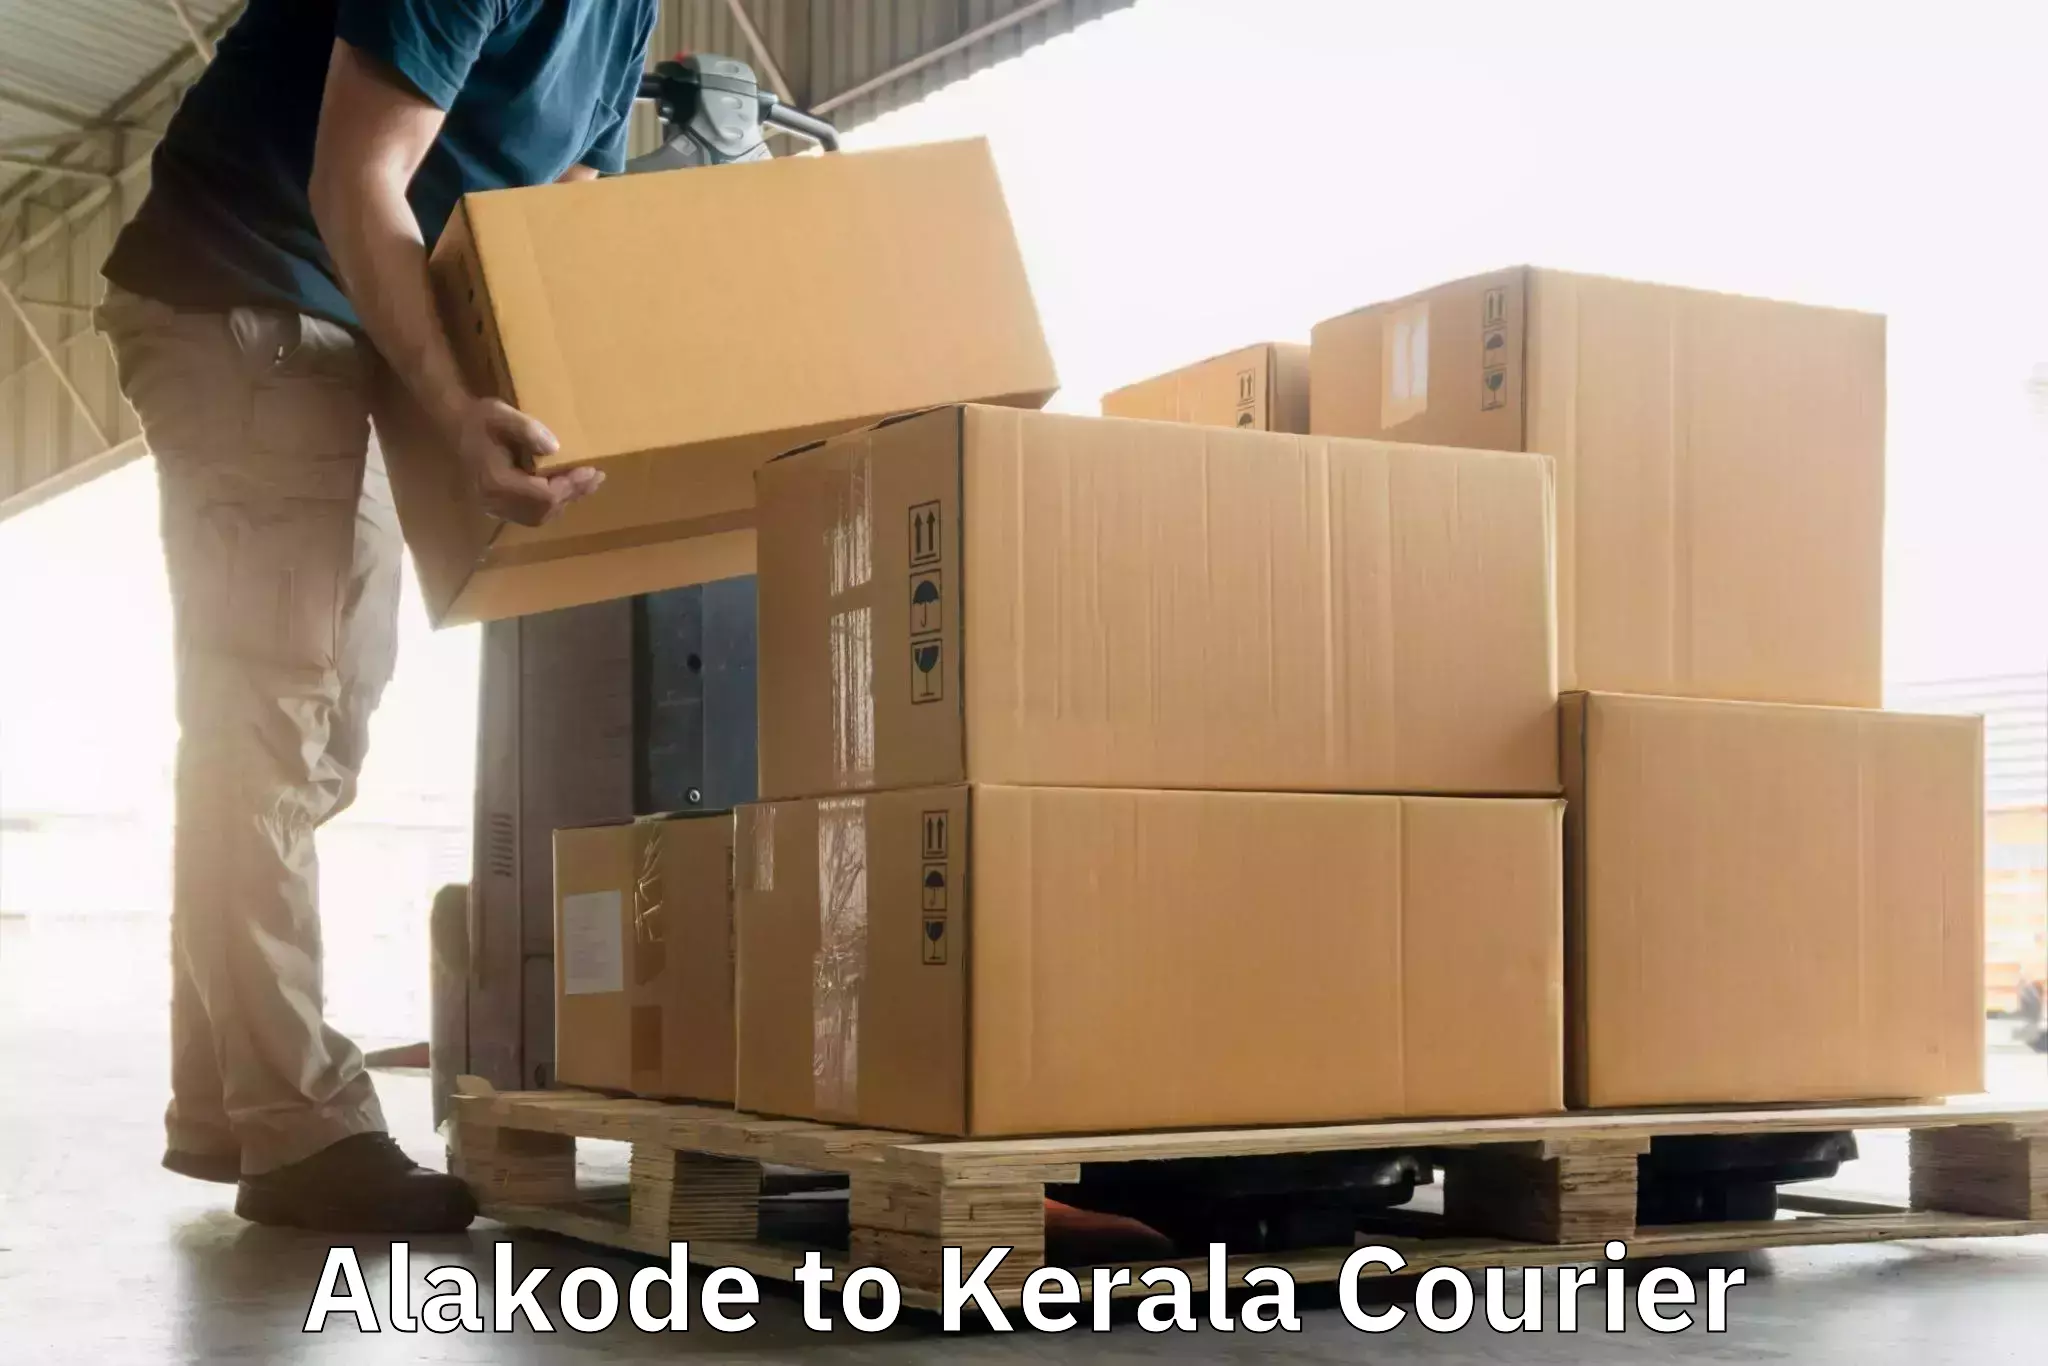 State-of-the-art courier technology Alakode to Cochin Port Kochi